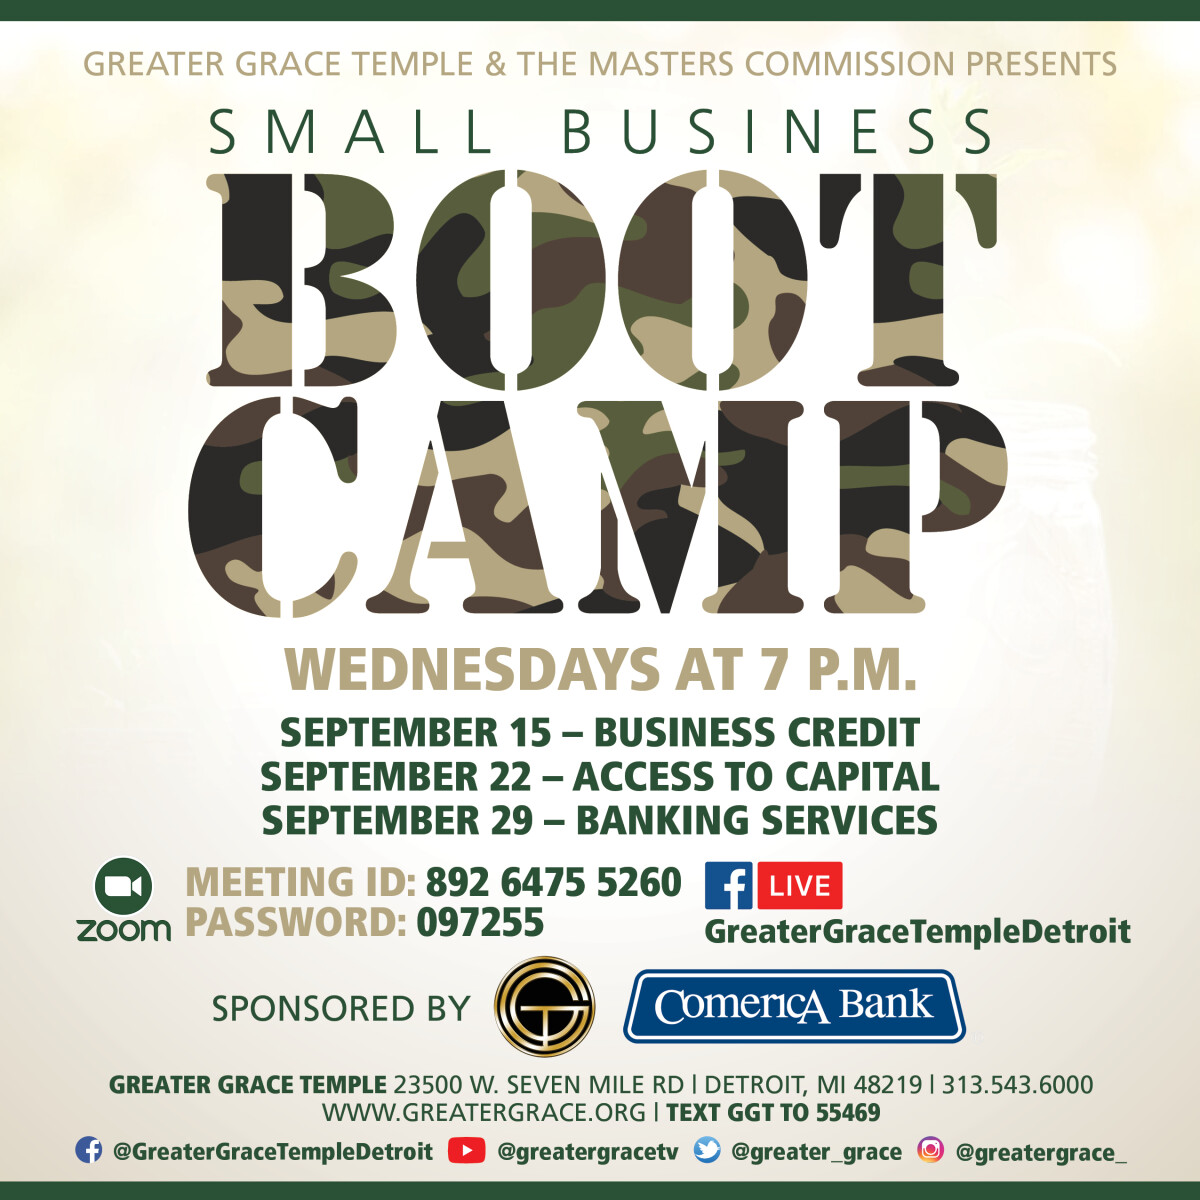 Small Business Bootcamp